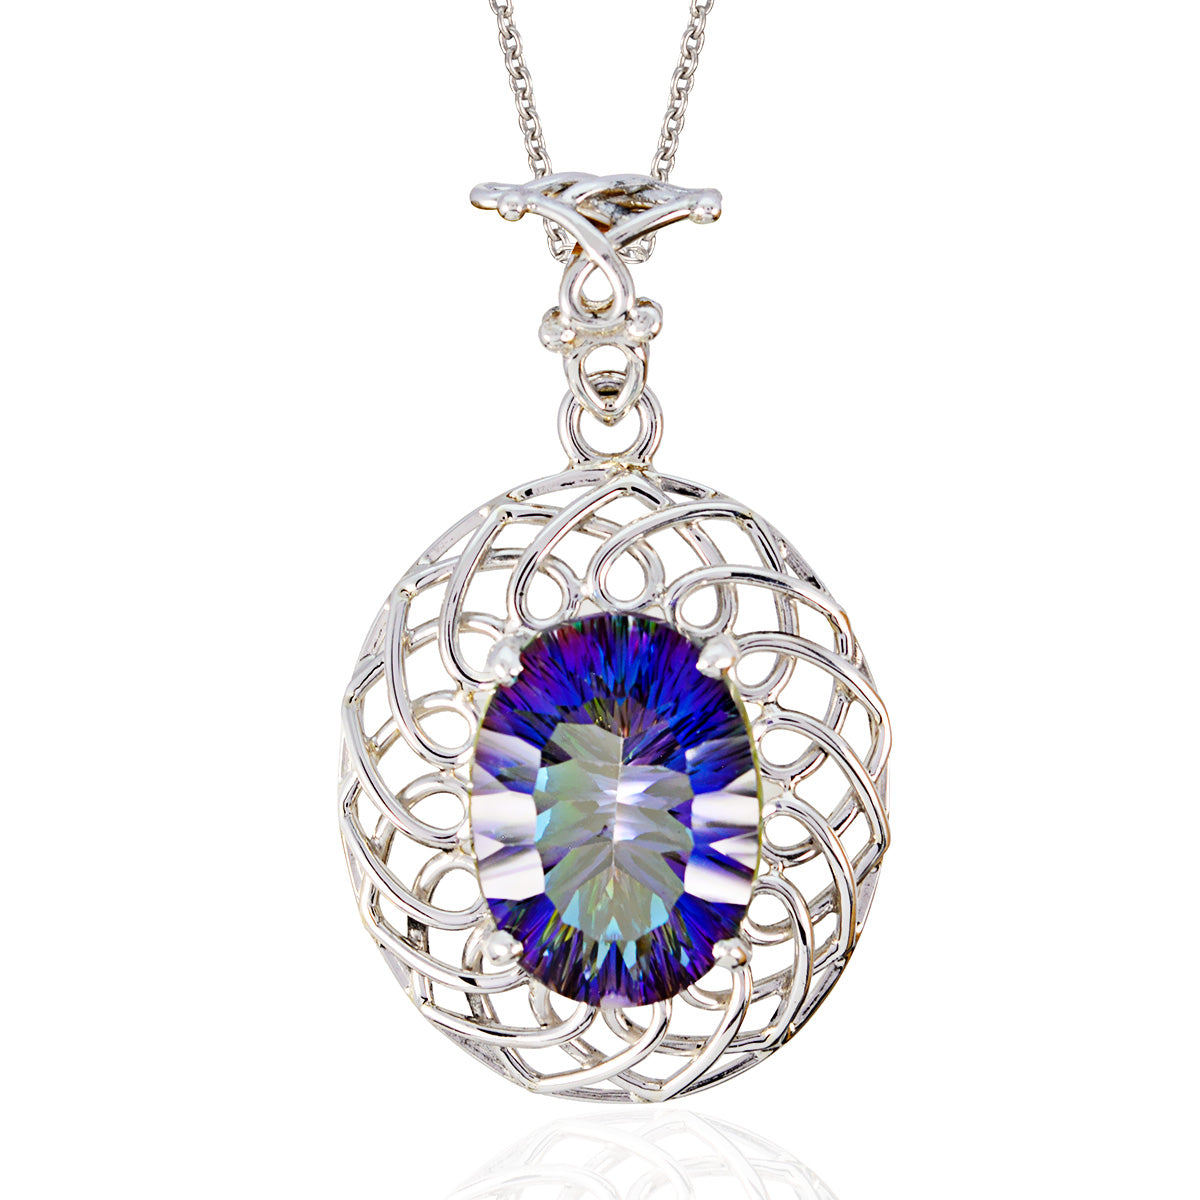 Riyo Real Gemstones Oval Faceted Multi Color Mystic Quartz 925 Silver Pendant gift for mothers day